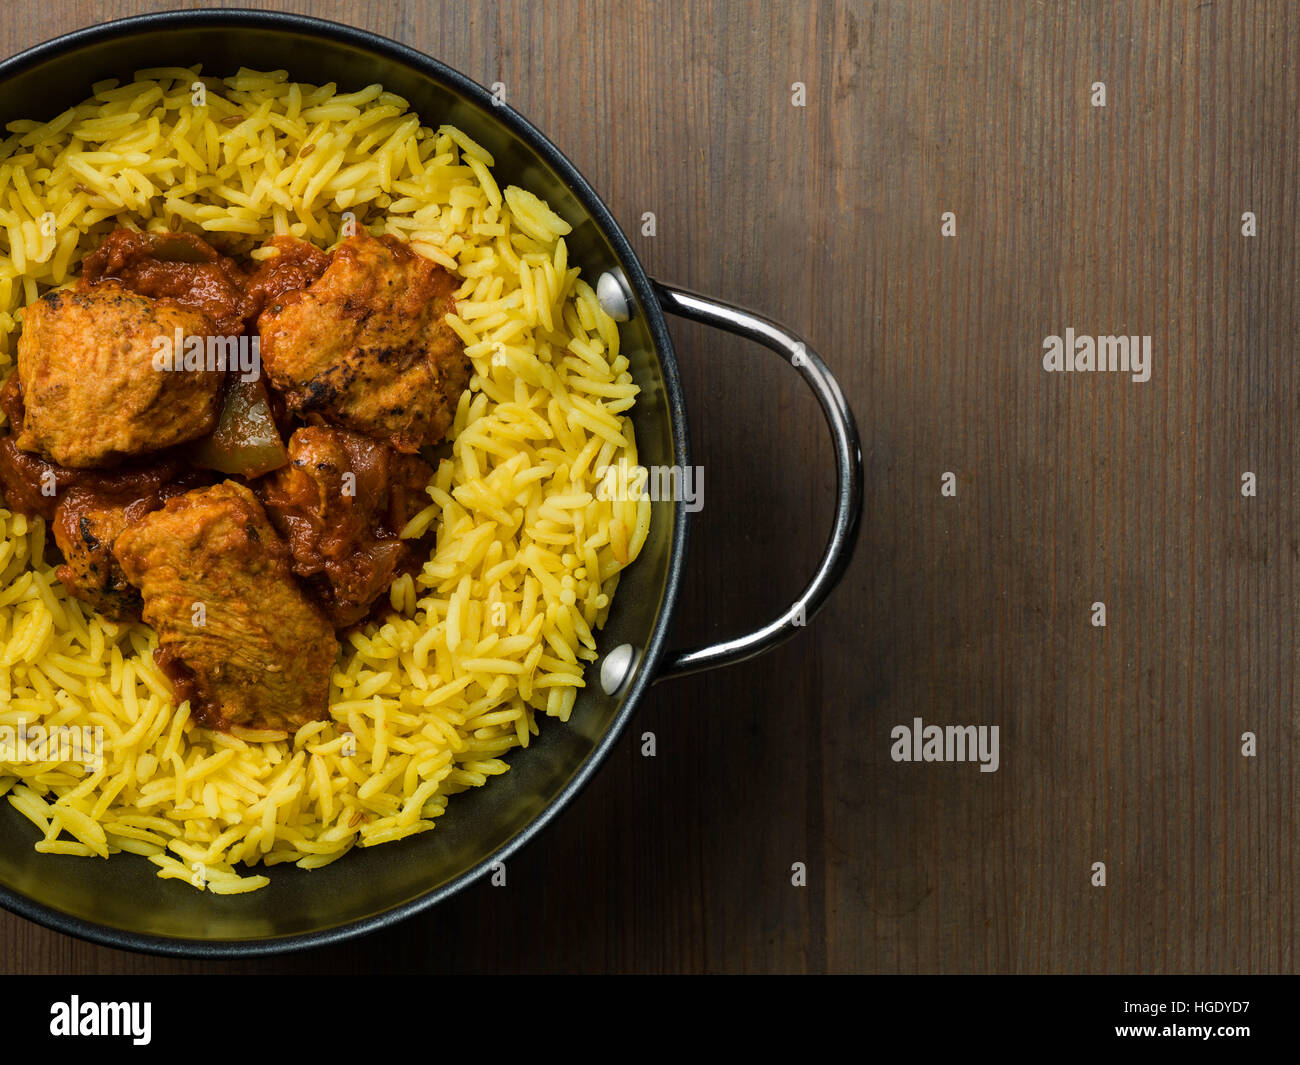 Freshly Cooked Authentic Indian Style Spicy Chicken Jalfrezi Curry Served With Yellow Pilau Rice Meal With No People And Flat Lay Composition Stock Photo